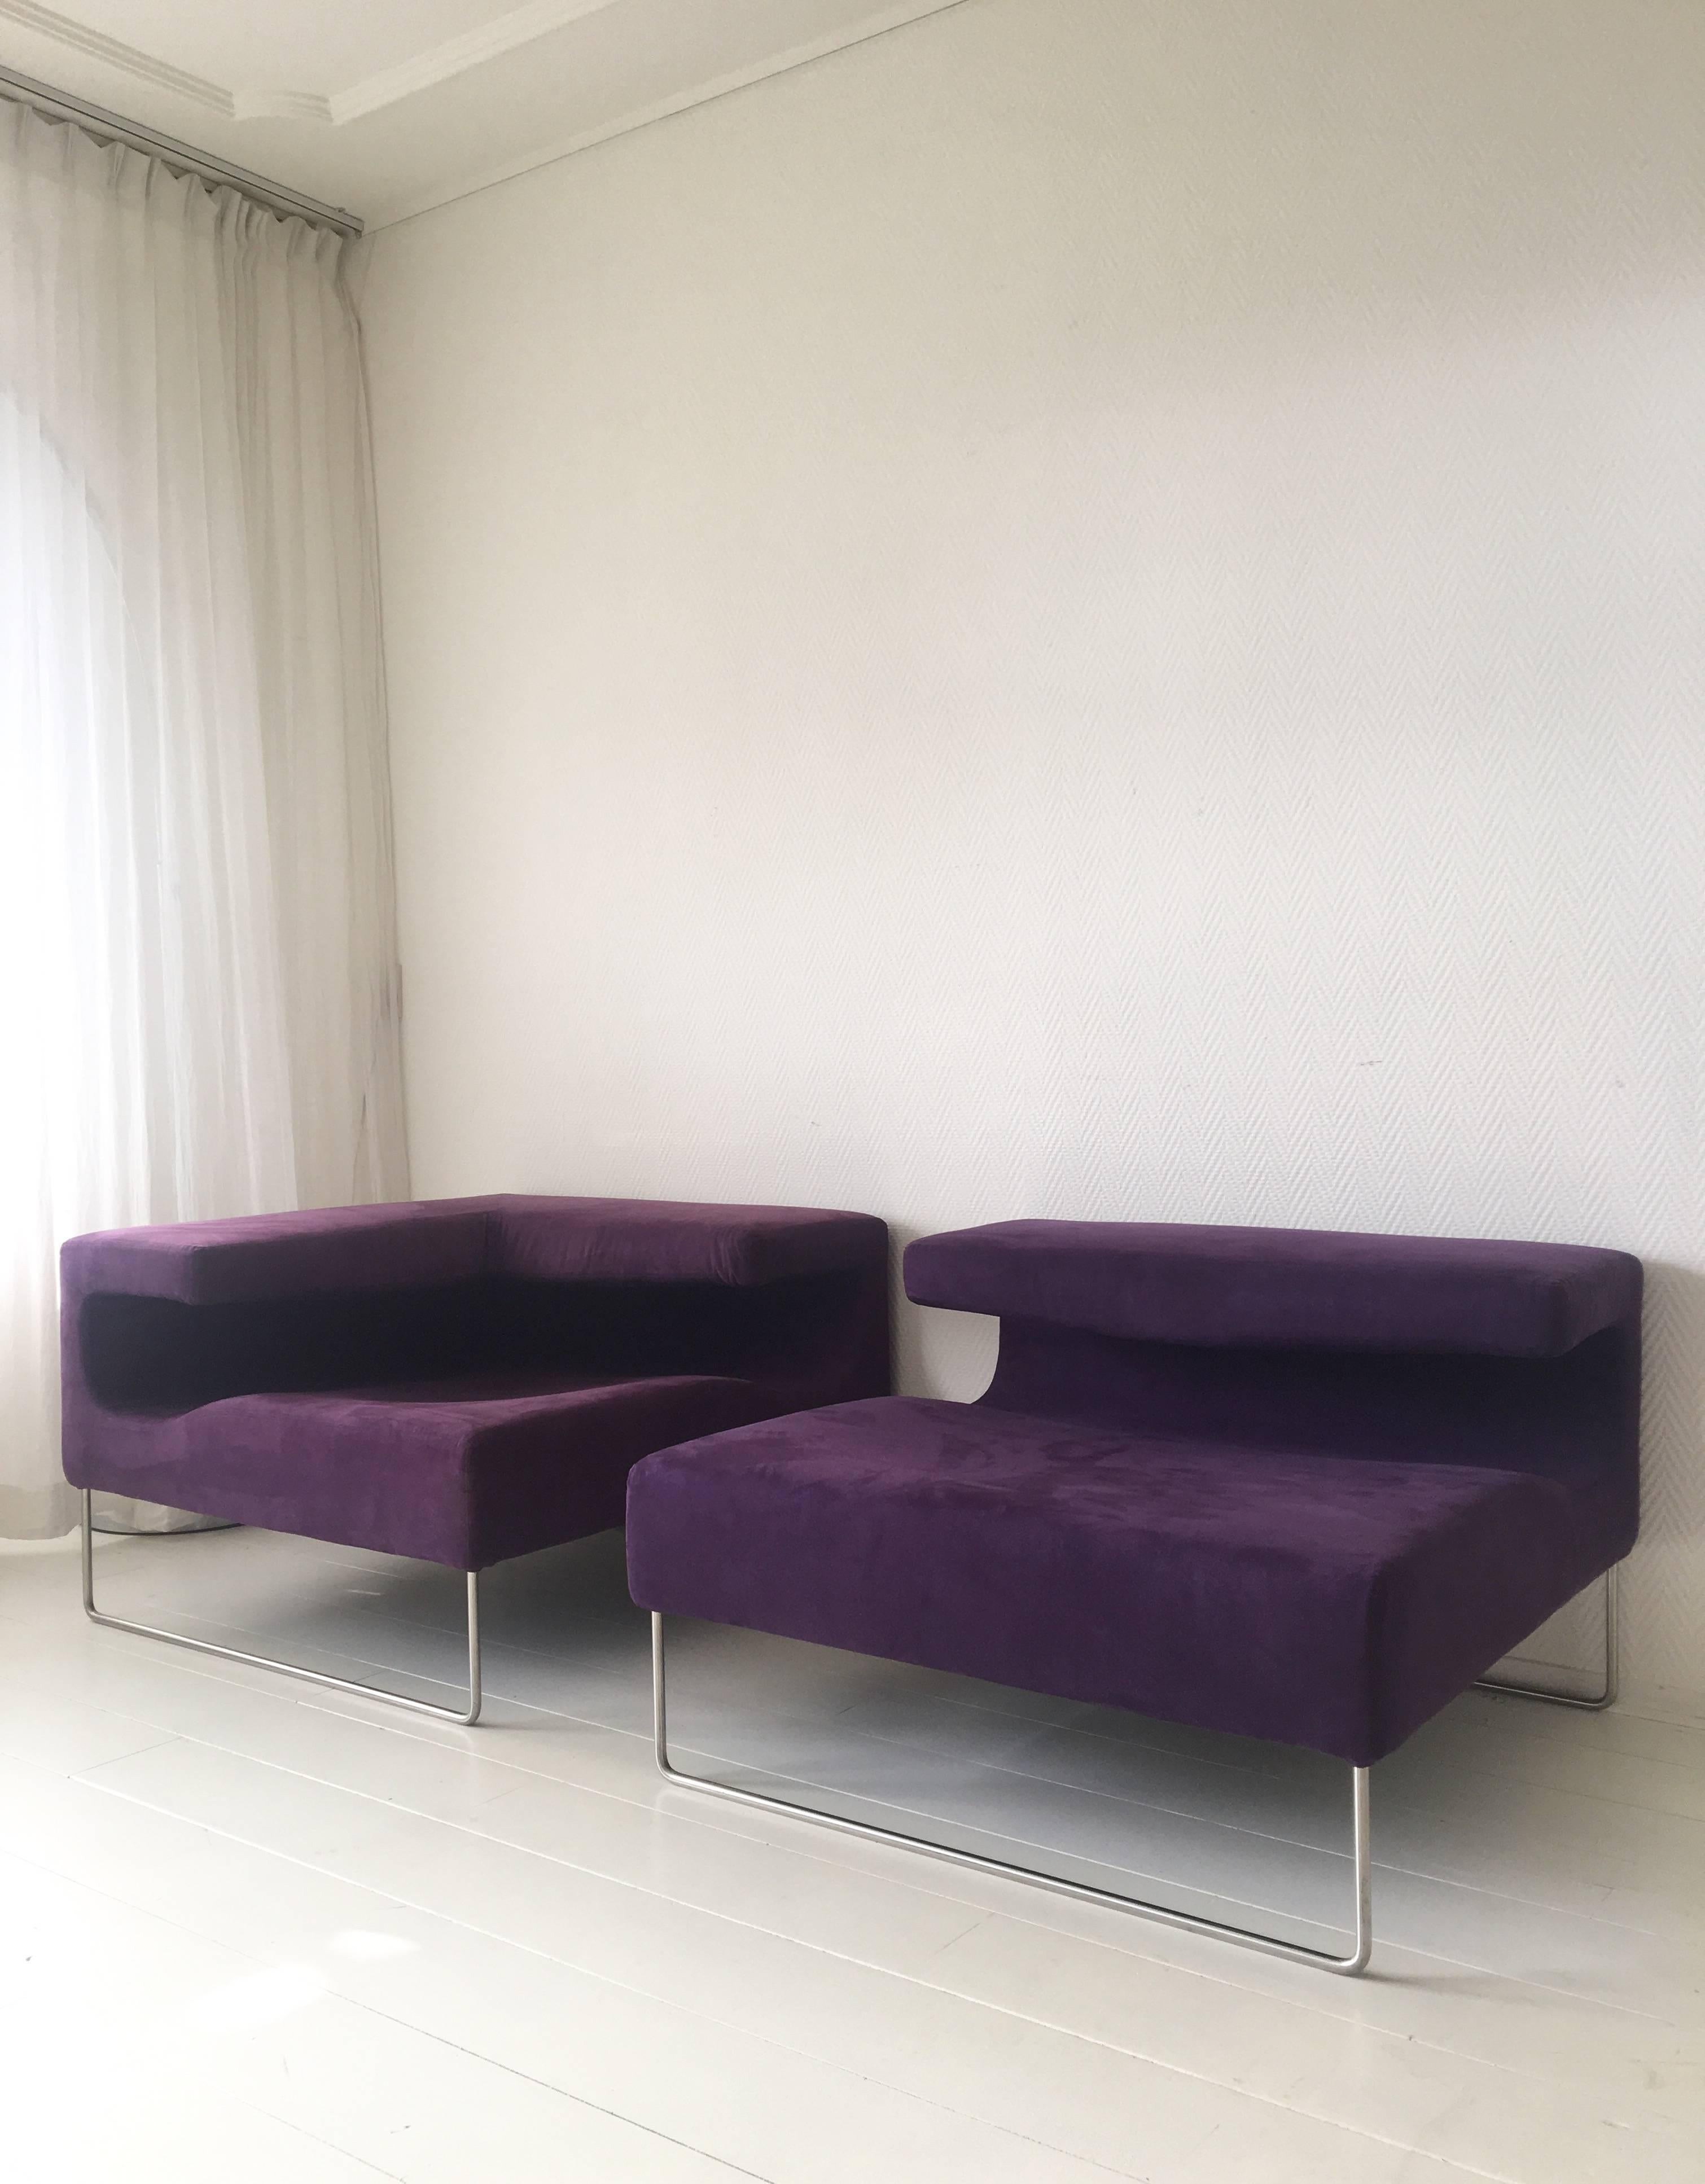 Minimalistic Purple Suede Chairs by Patricia Urquiola for Moroso In Good Condition For Sale In Schagen, NL